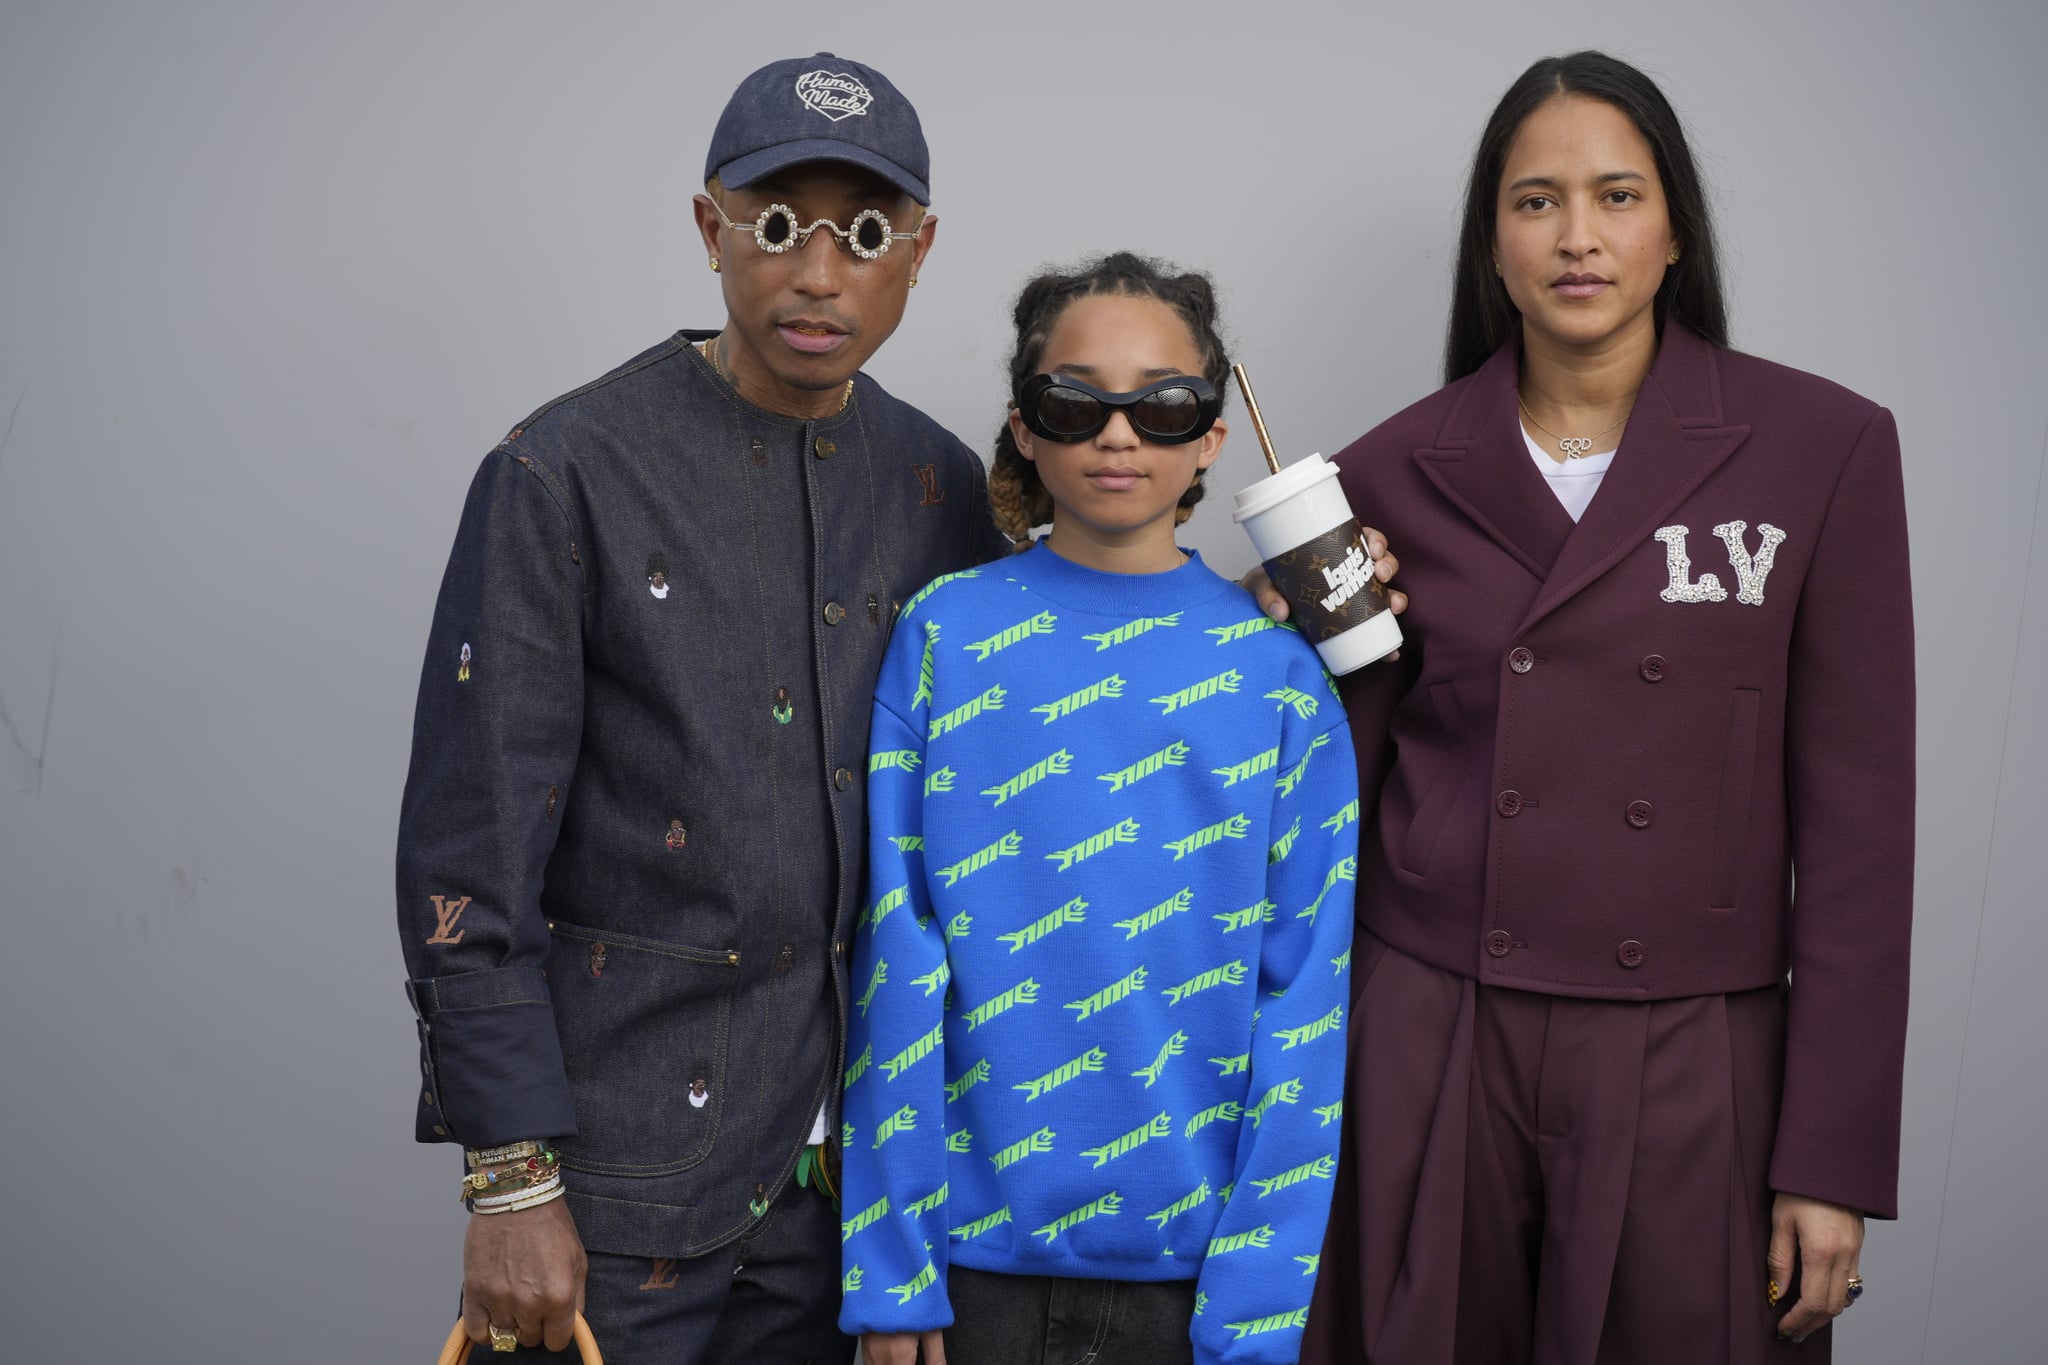 How Many Kids Does Pharrell Williams Have?